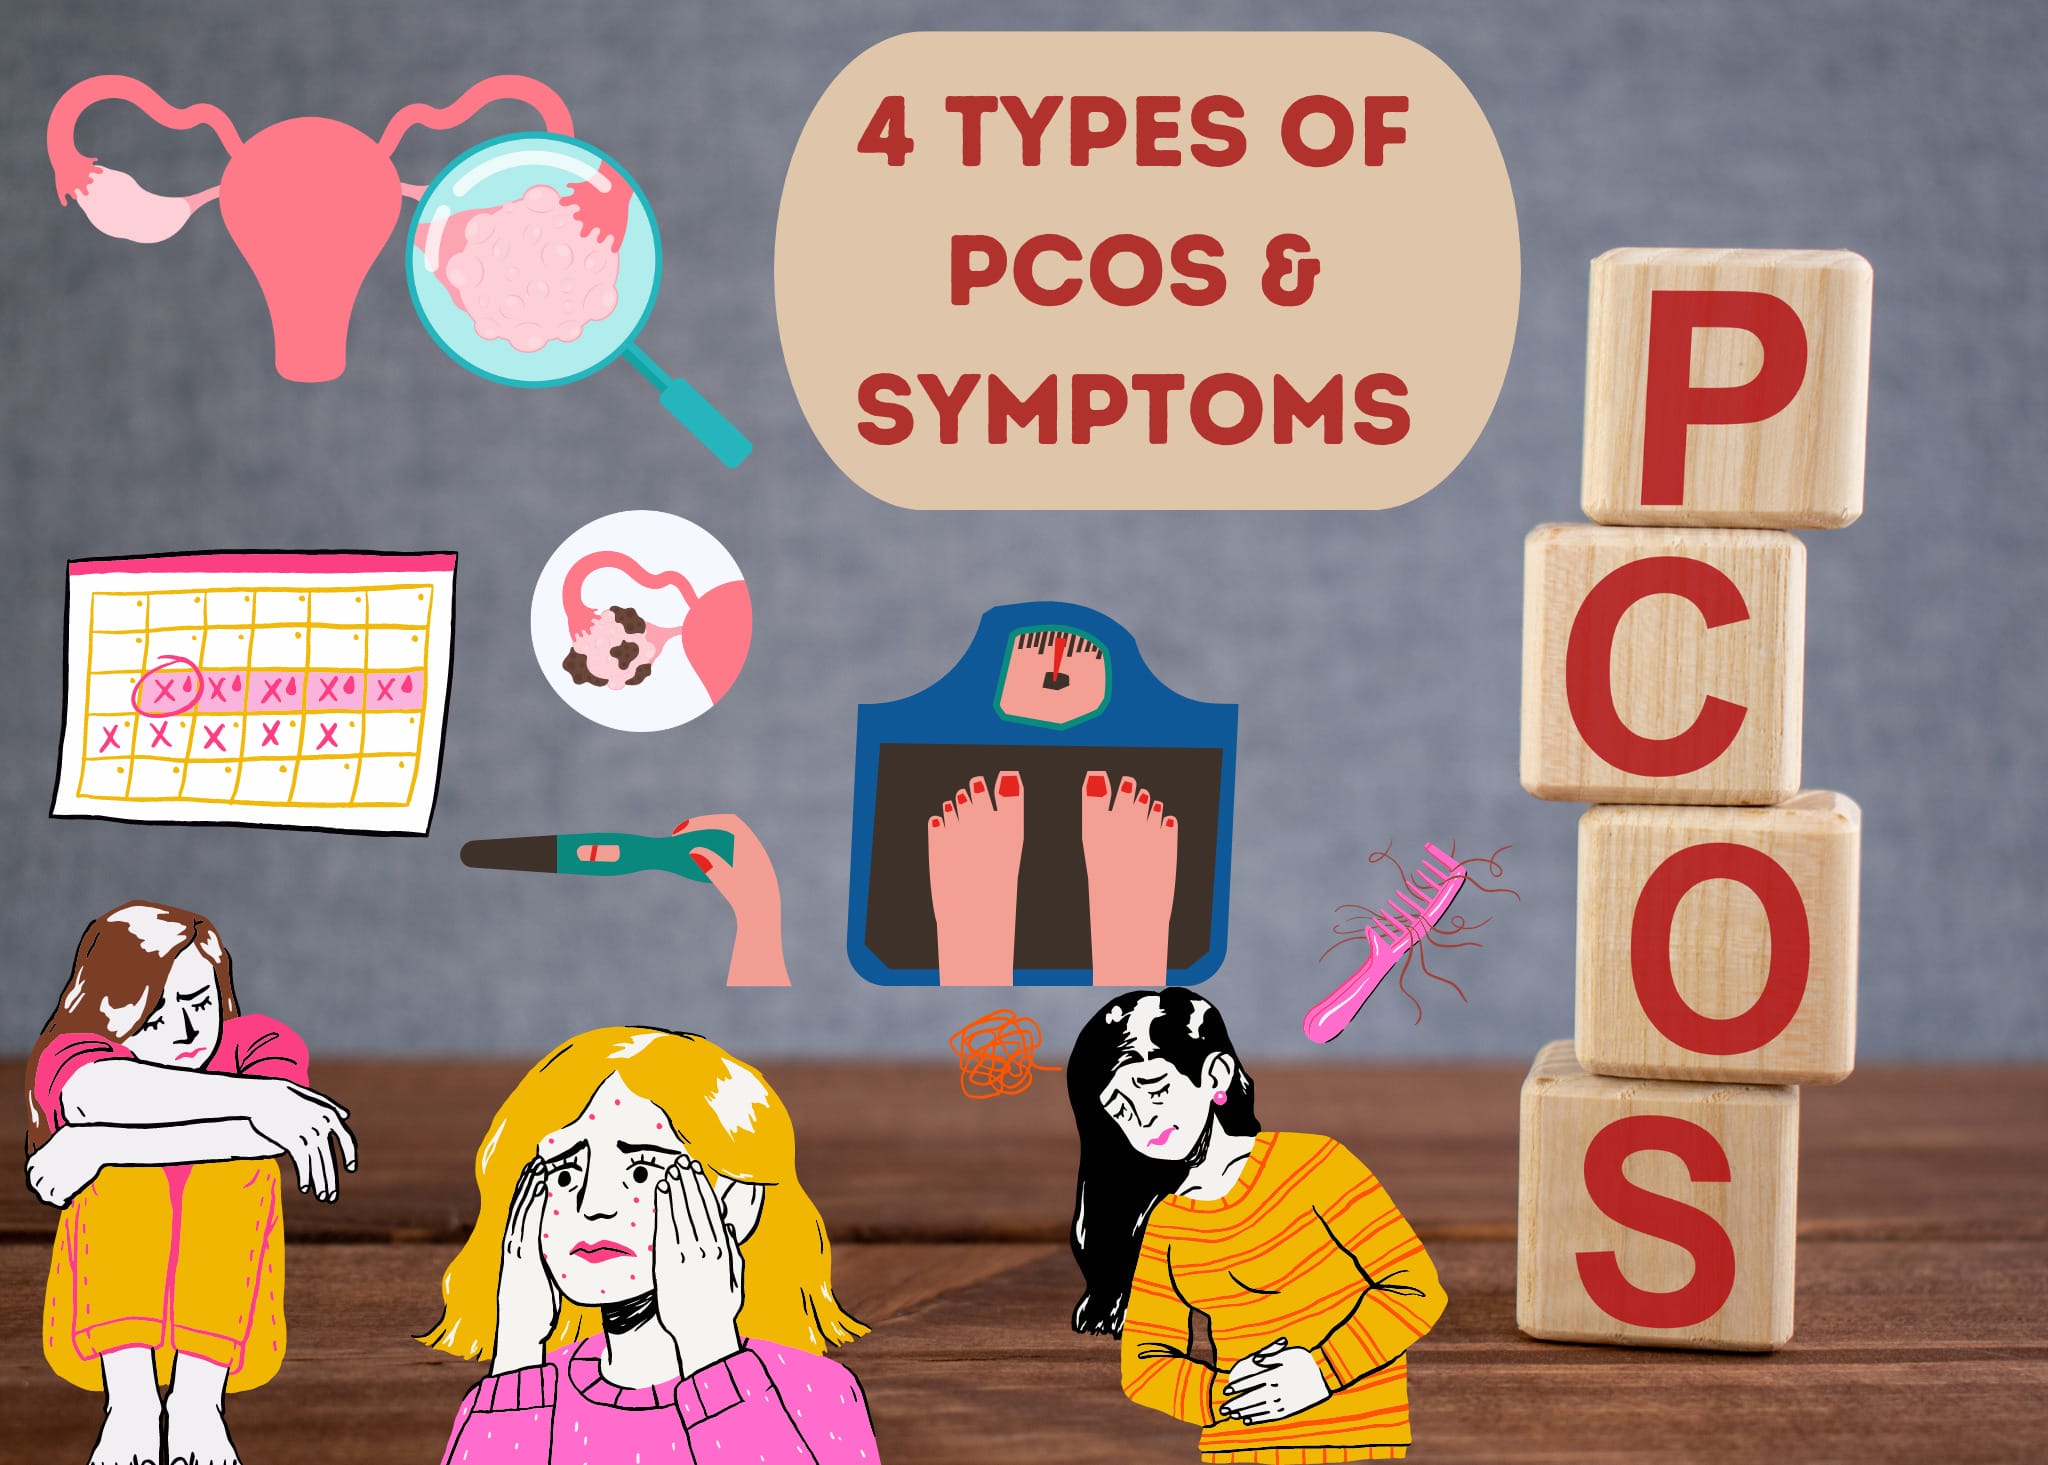 4 types of PCOS and symptoms